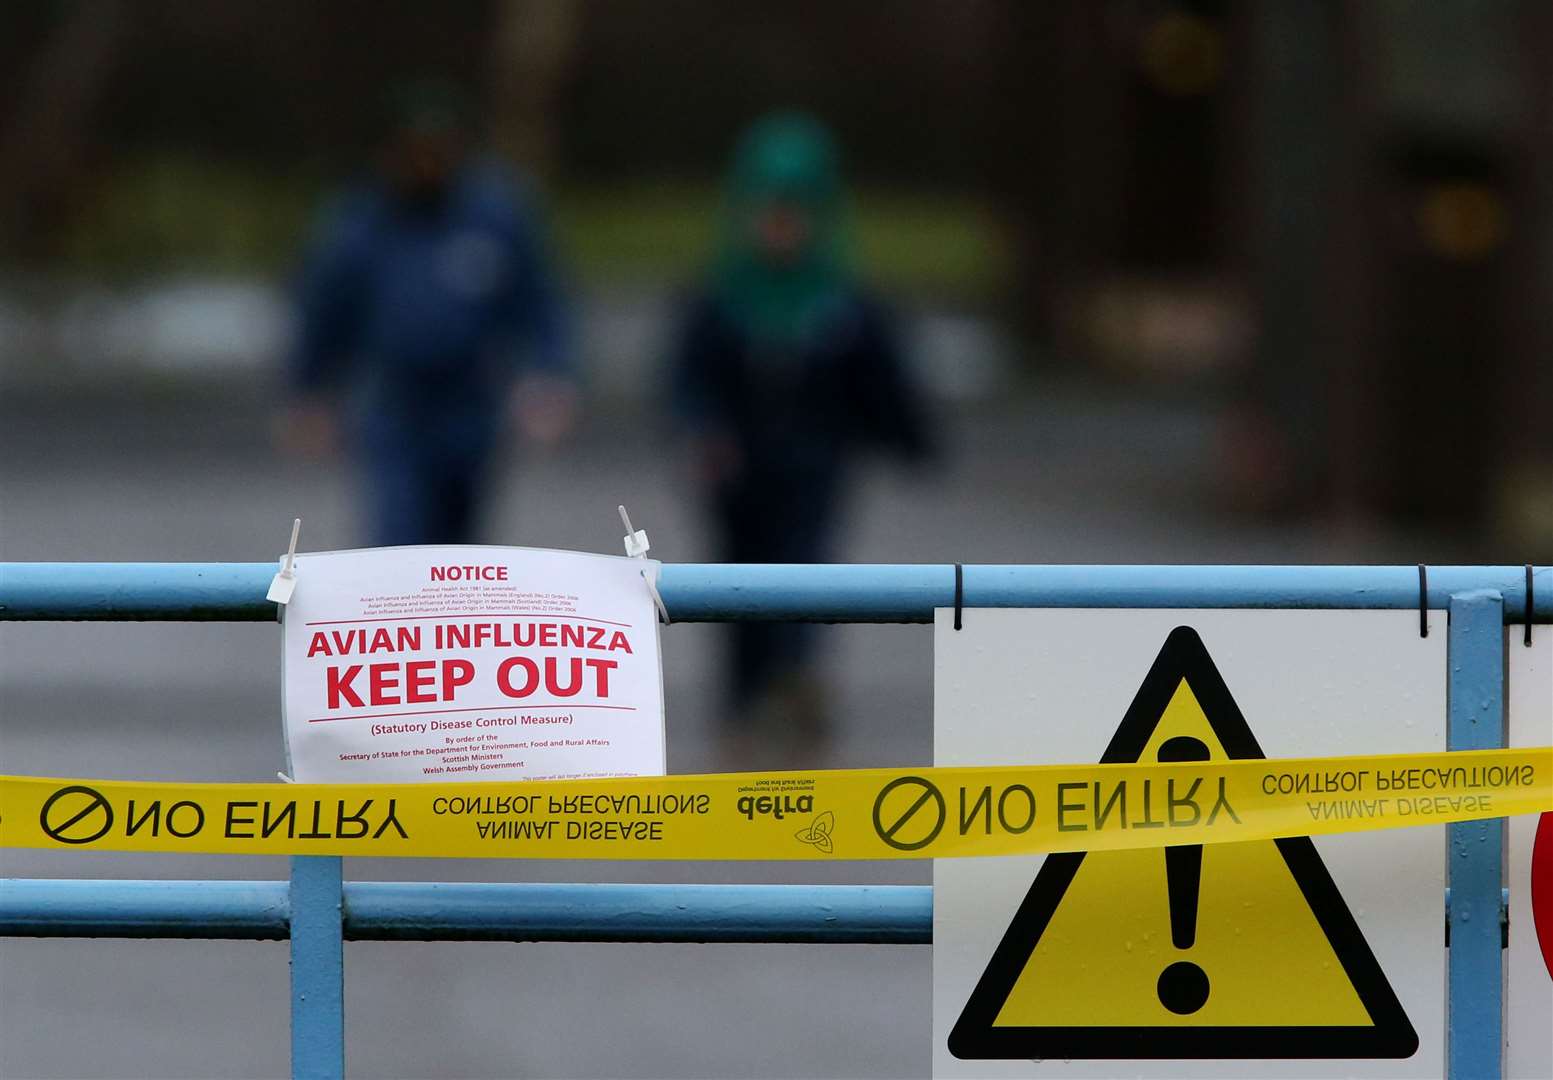 Biosecurity measures to reduce the transmission of bird flu will remain in force in England, Scotland and Wales until further notice (Andrew Milligan/PA)